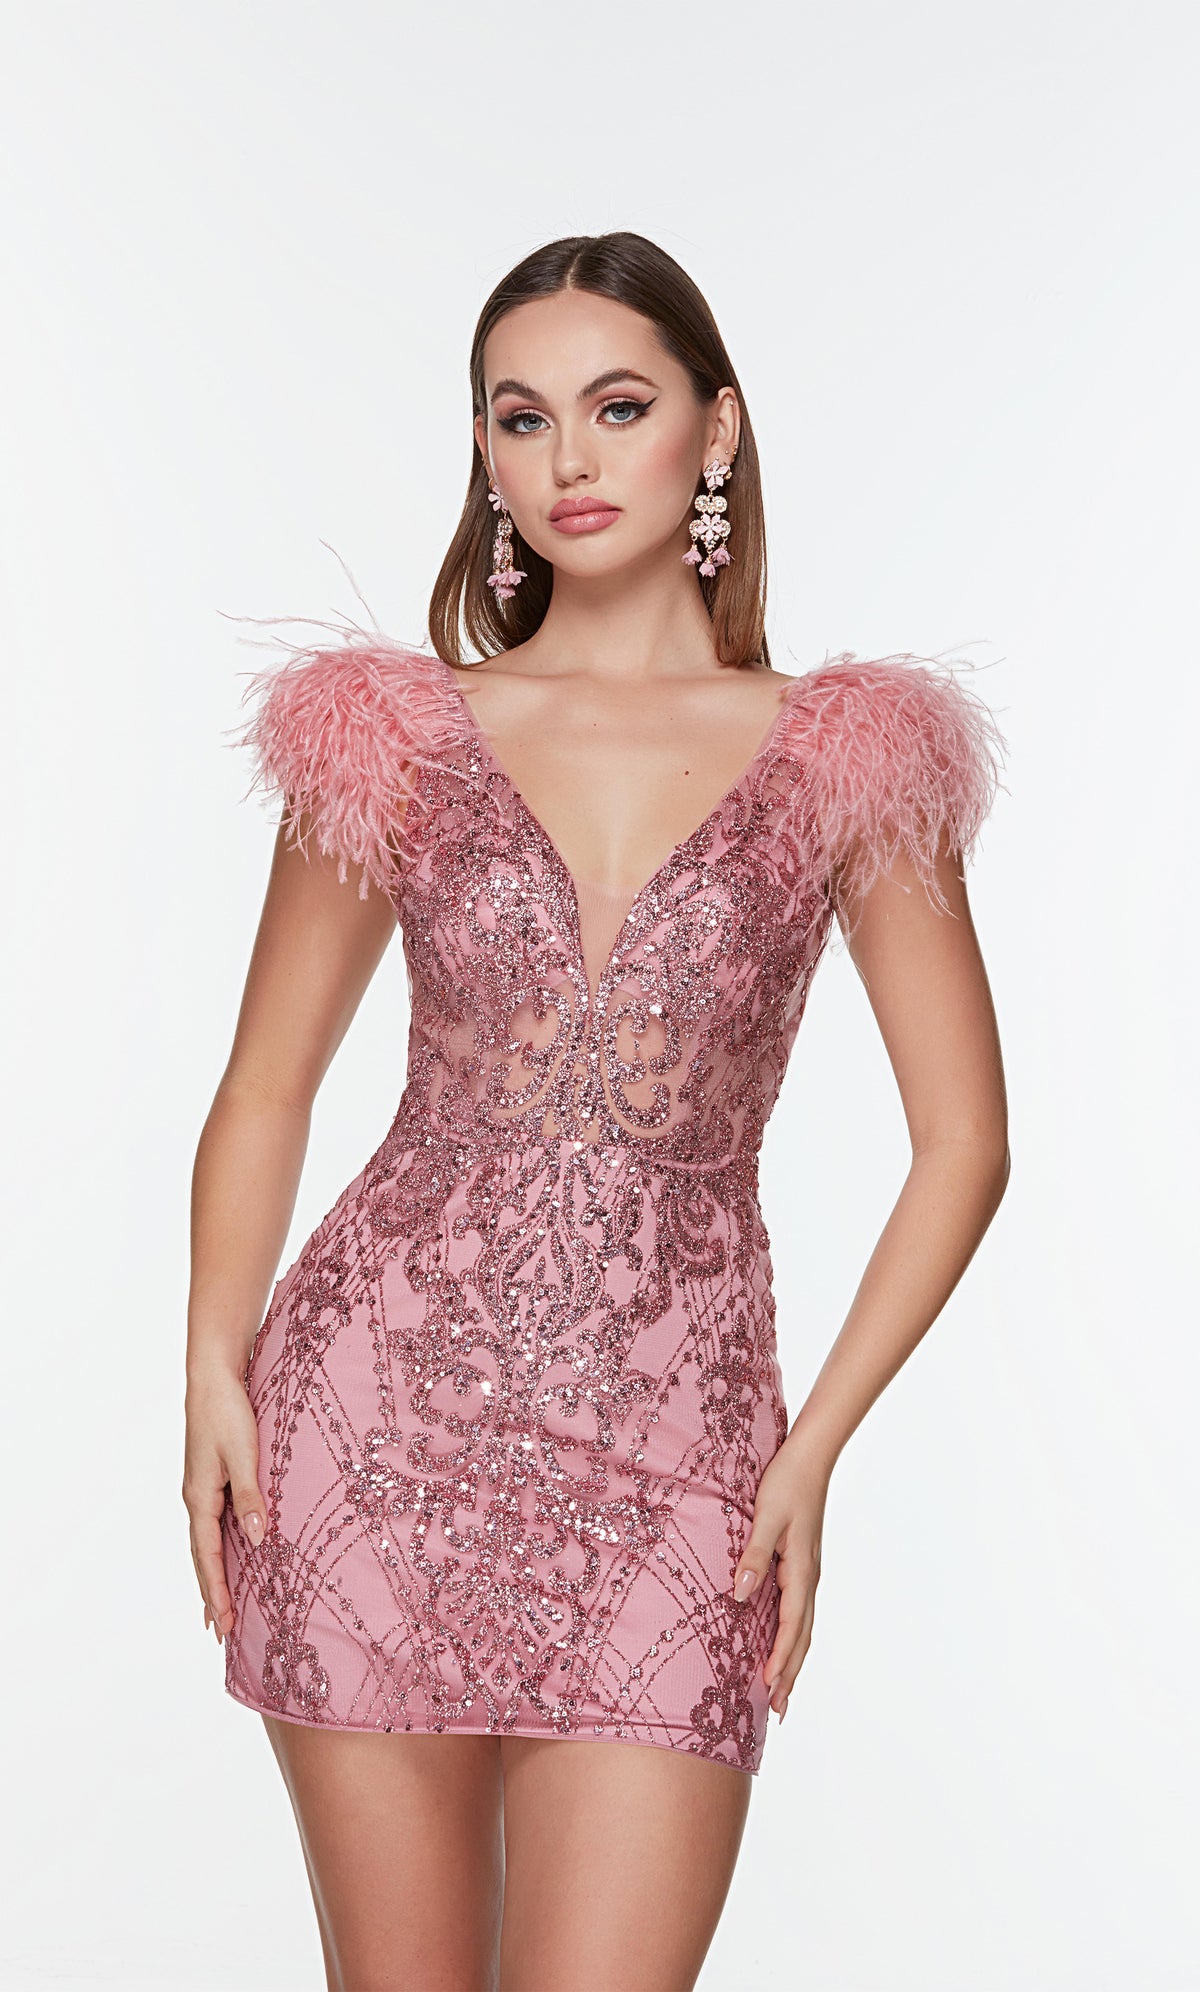 Pink mini dress with a plunging neckline, sheer bodice, and feather accents. 